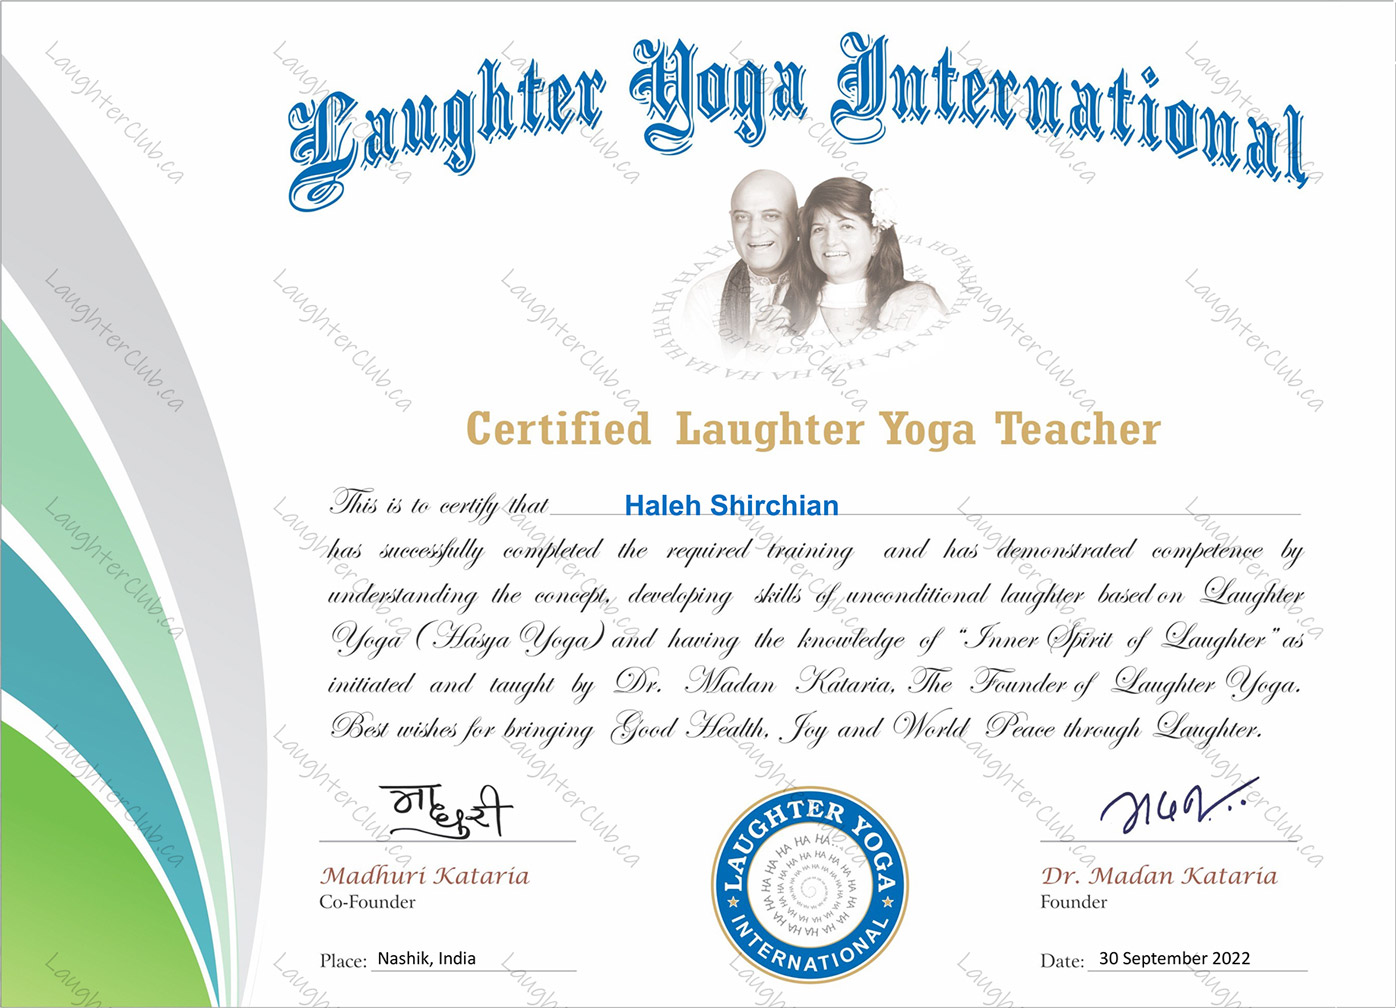 Certified for Teaching Laughter Yoga